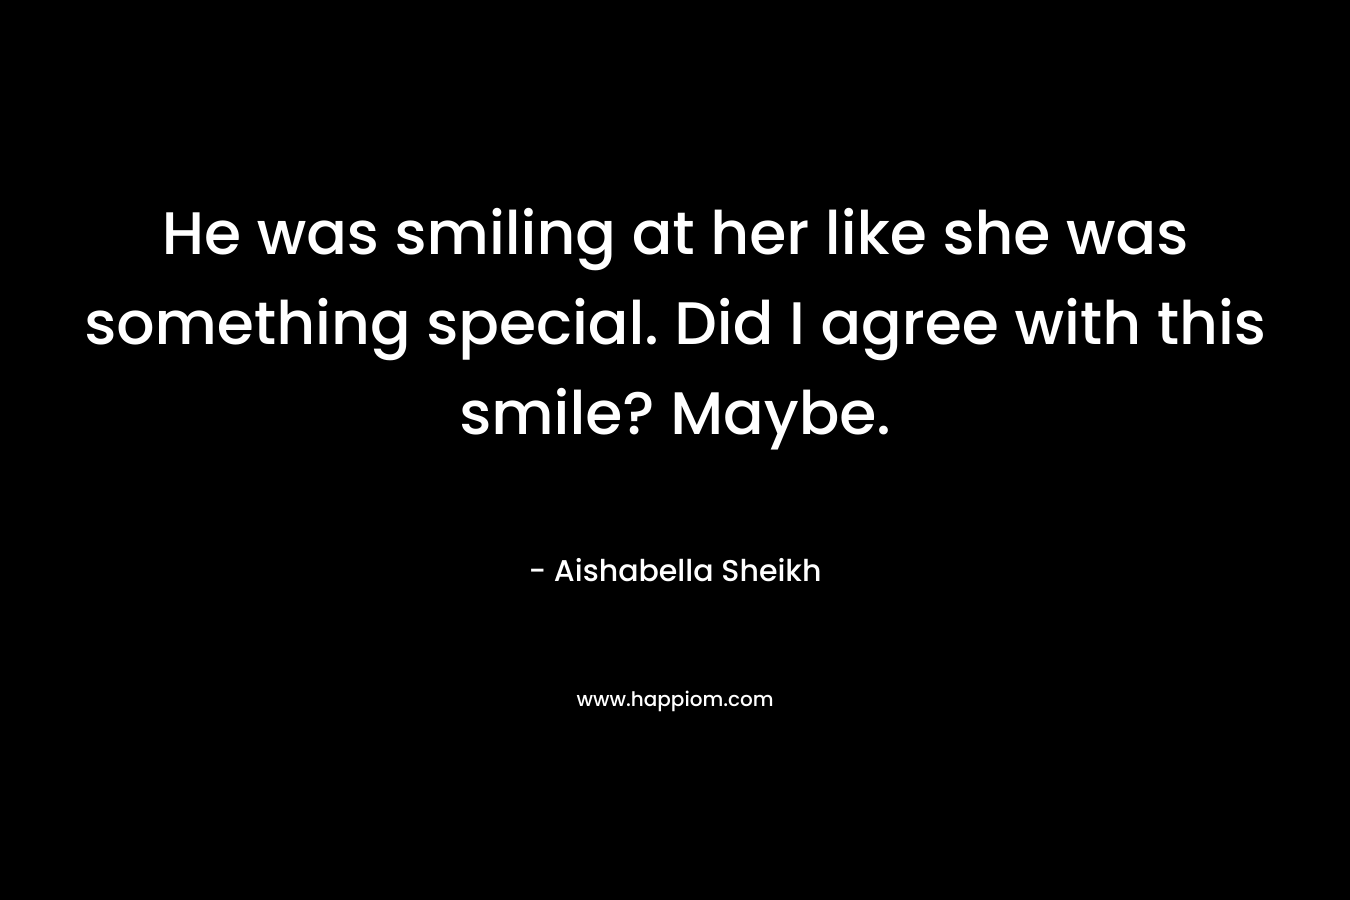 He was smiling at her like she was something special. Did I agree with this smile? Maybe.